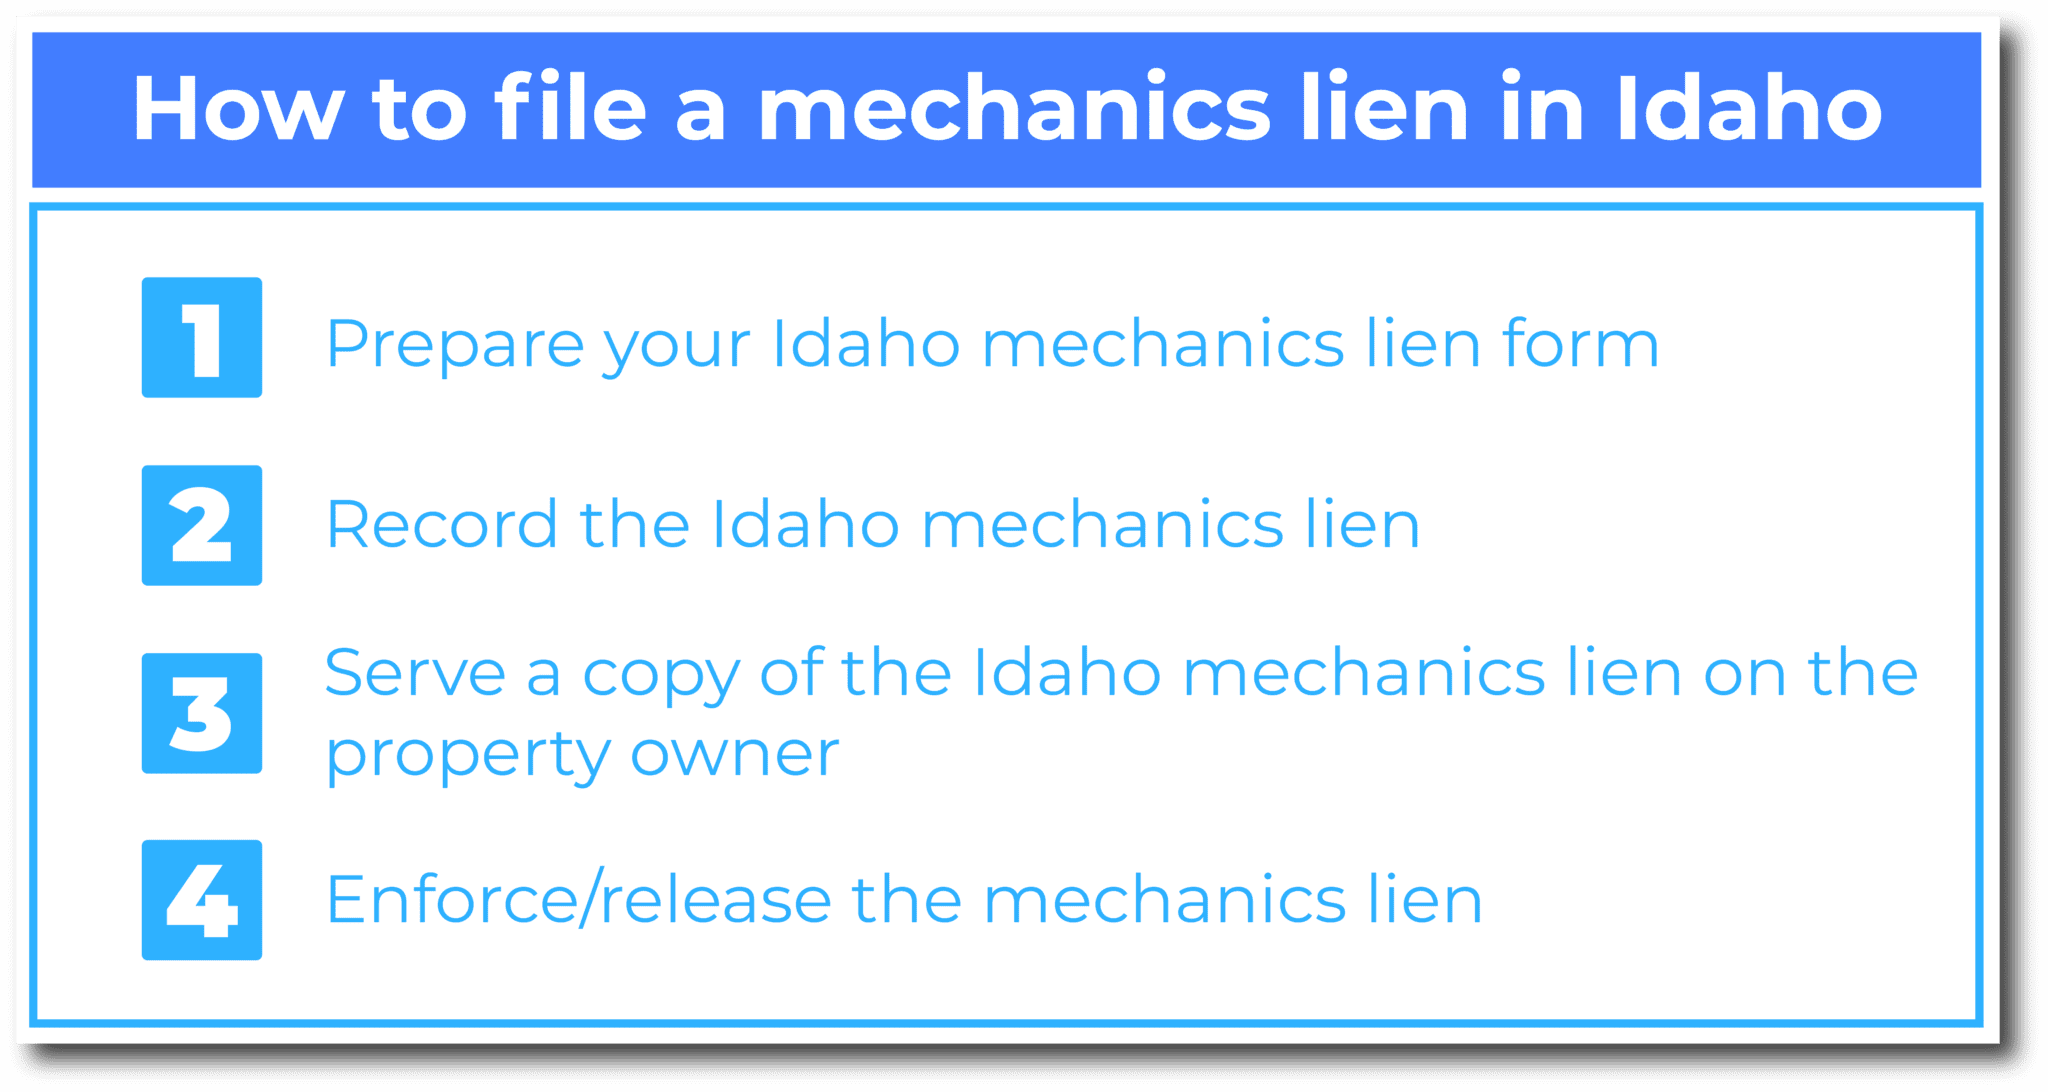 How to file a mechanics lien in Idaho